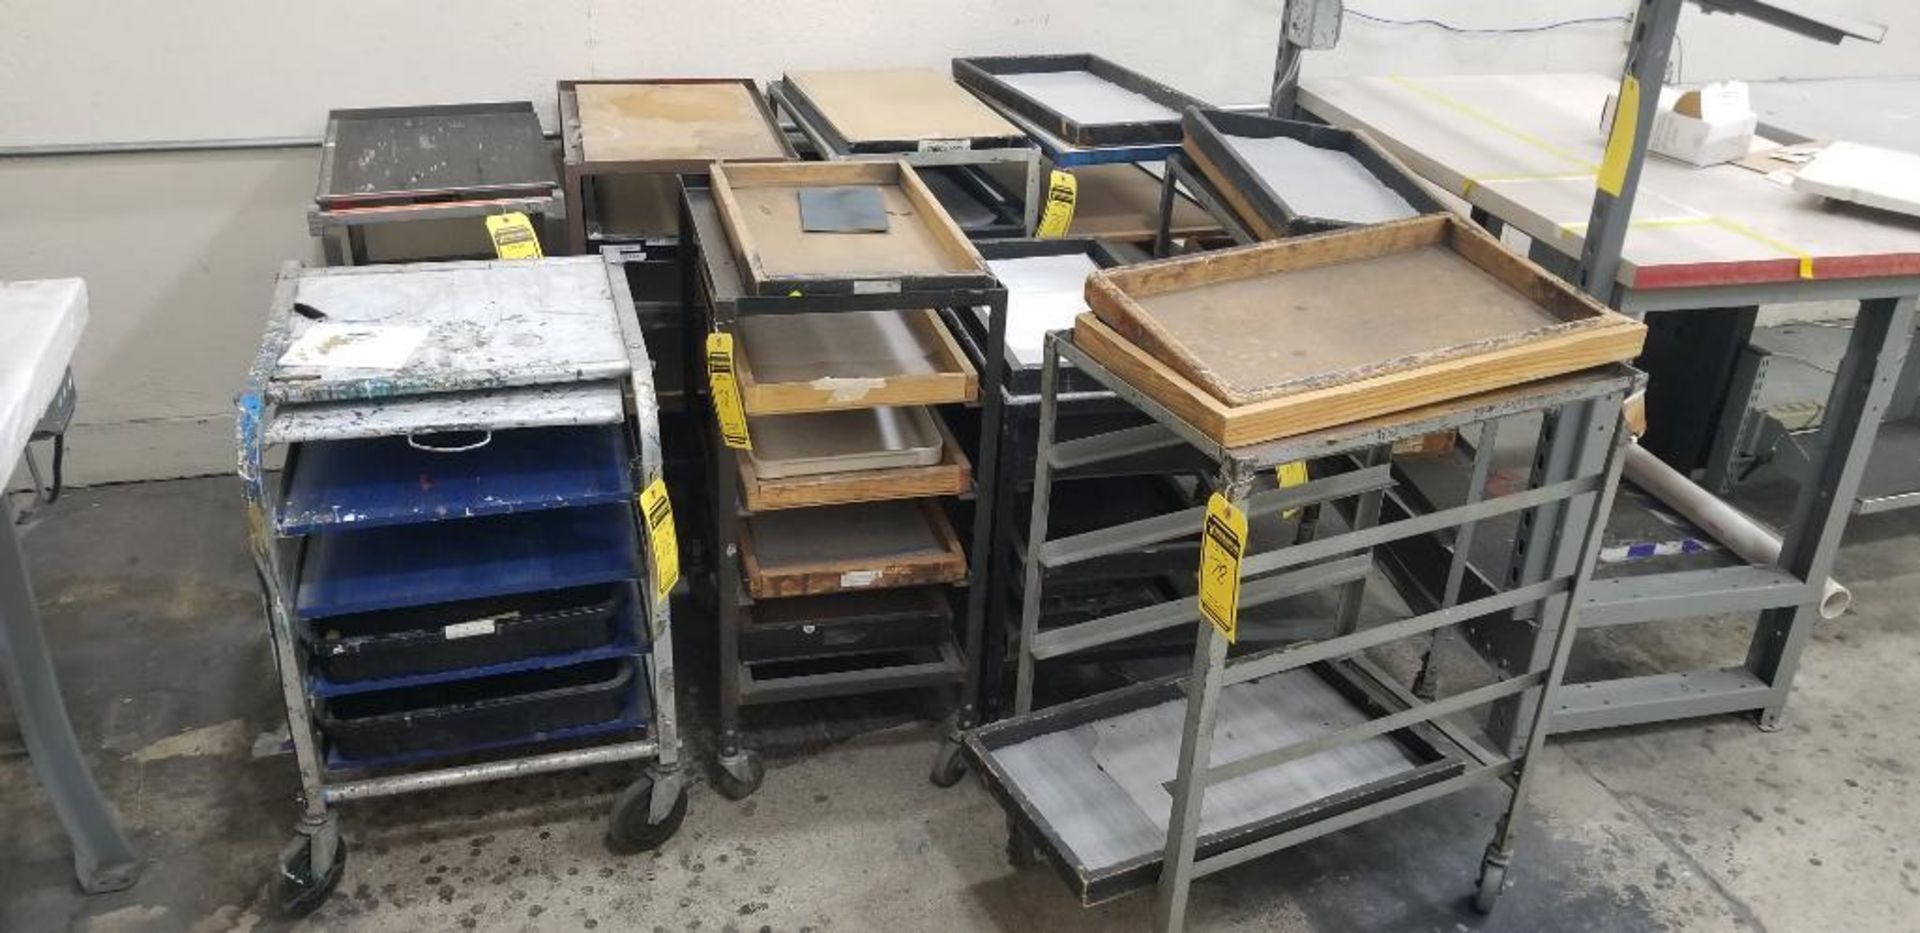 (7) Assorted Print Tray Carts